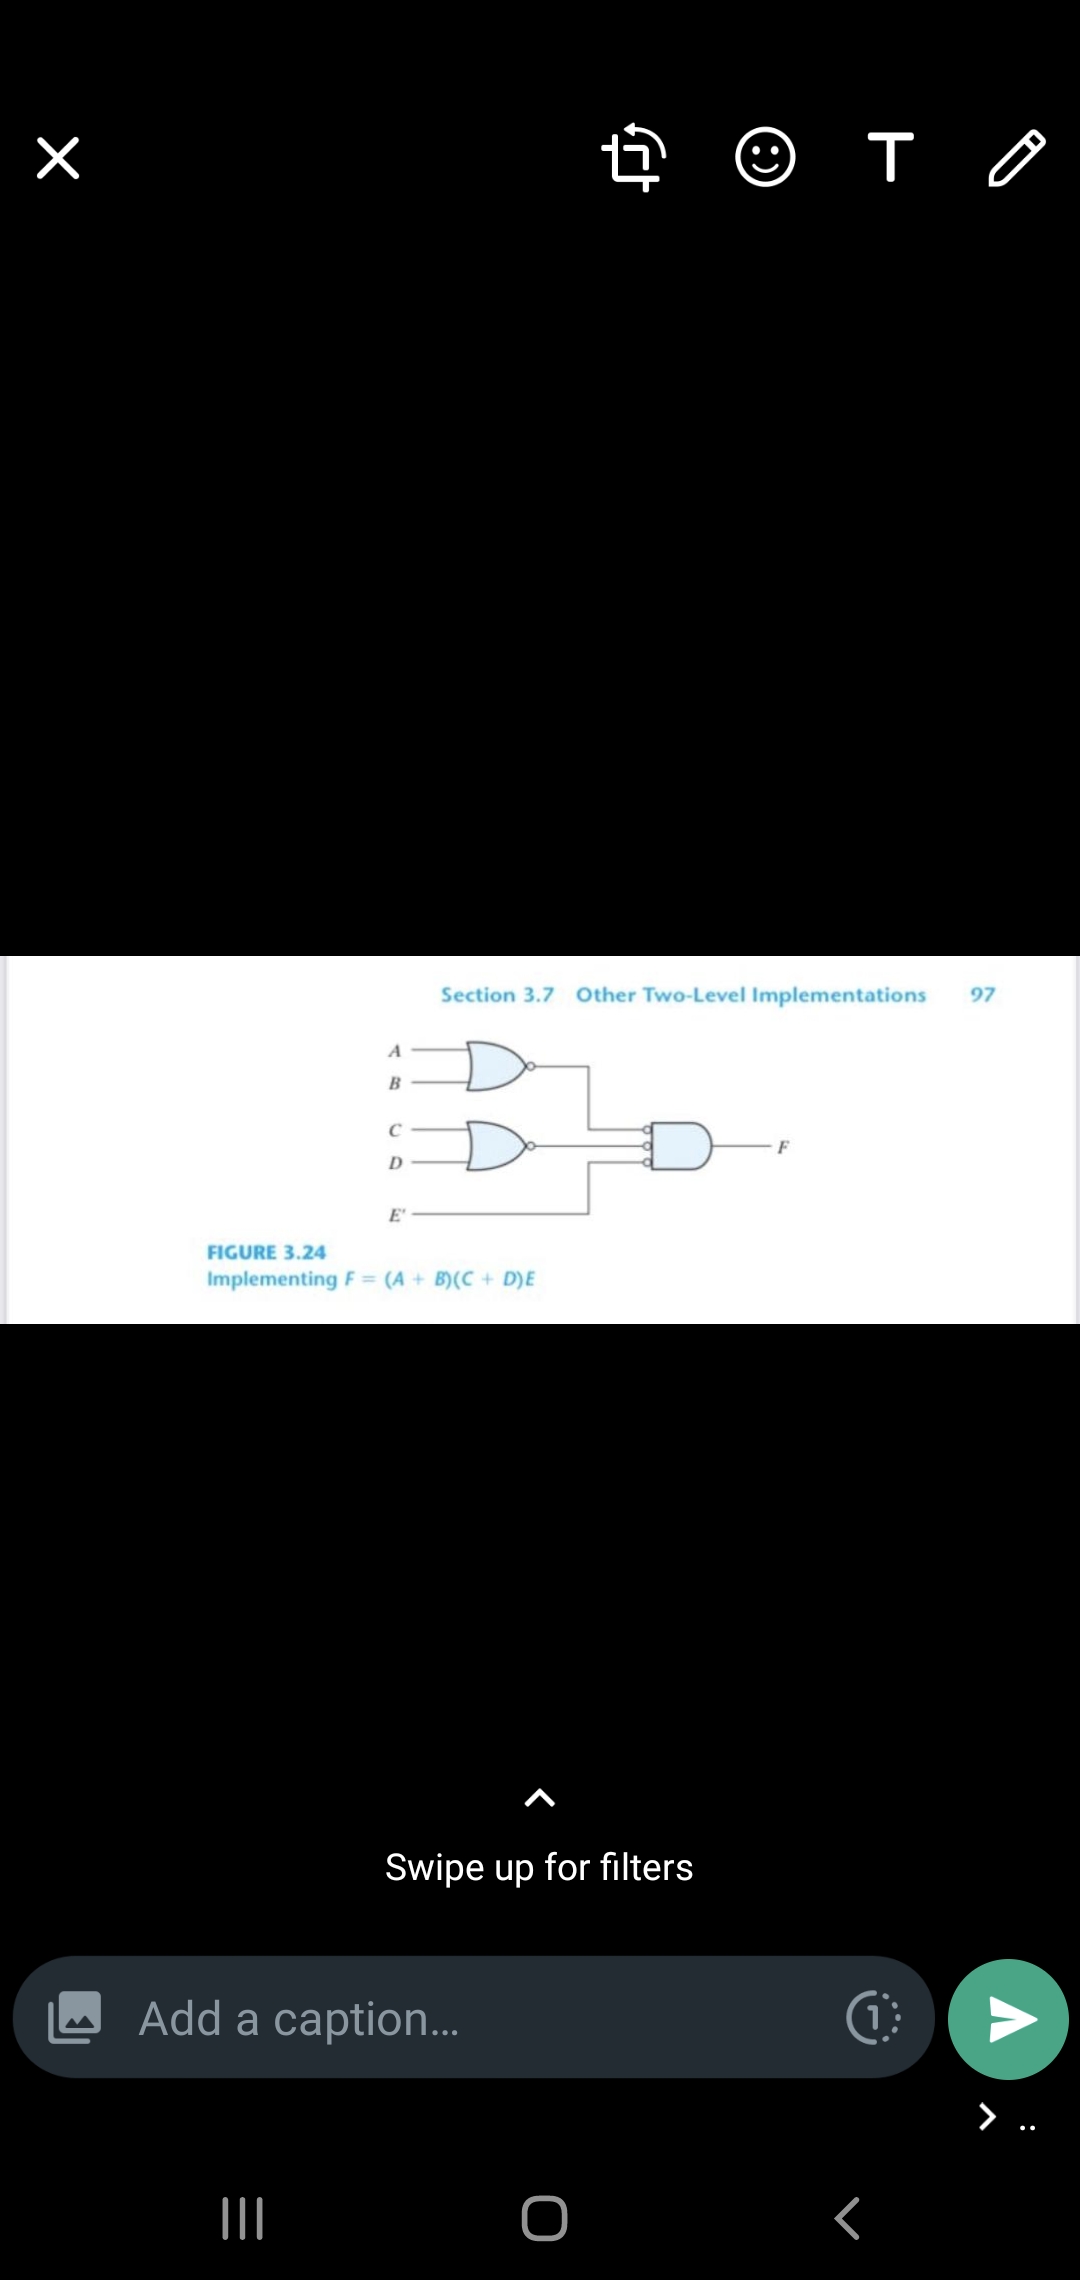 Section 3.7
Other Two-Level Implementations
97
B
C
F
E'
FIGURE 3.24
Implementing F = (A + B)(C + D)E
Swipe up for filters
Add a caption...
> .
